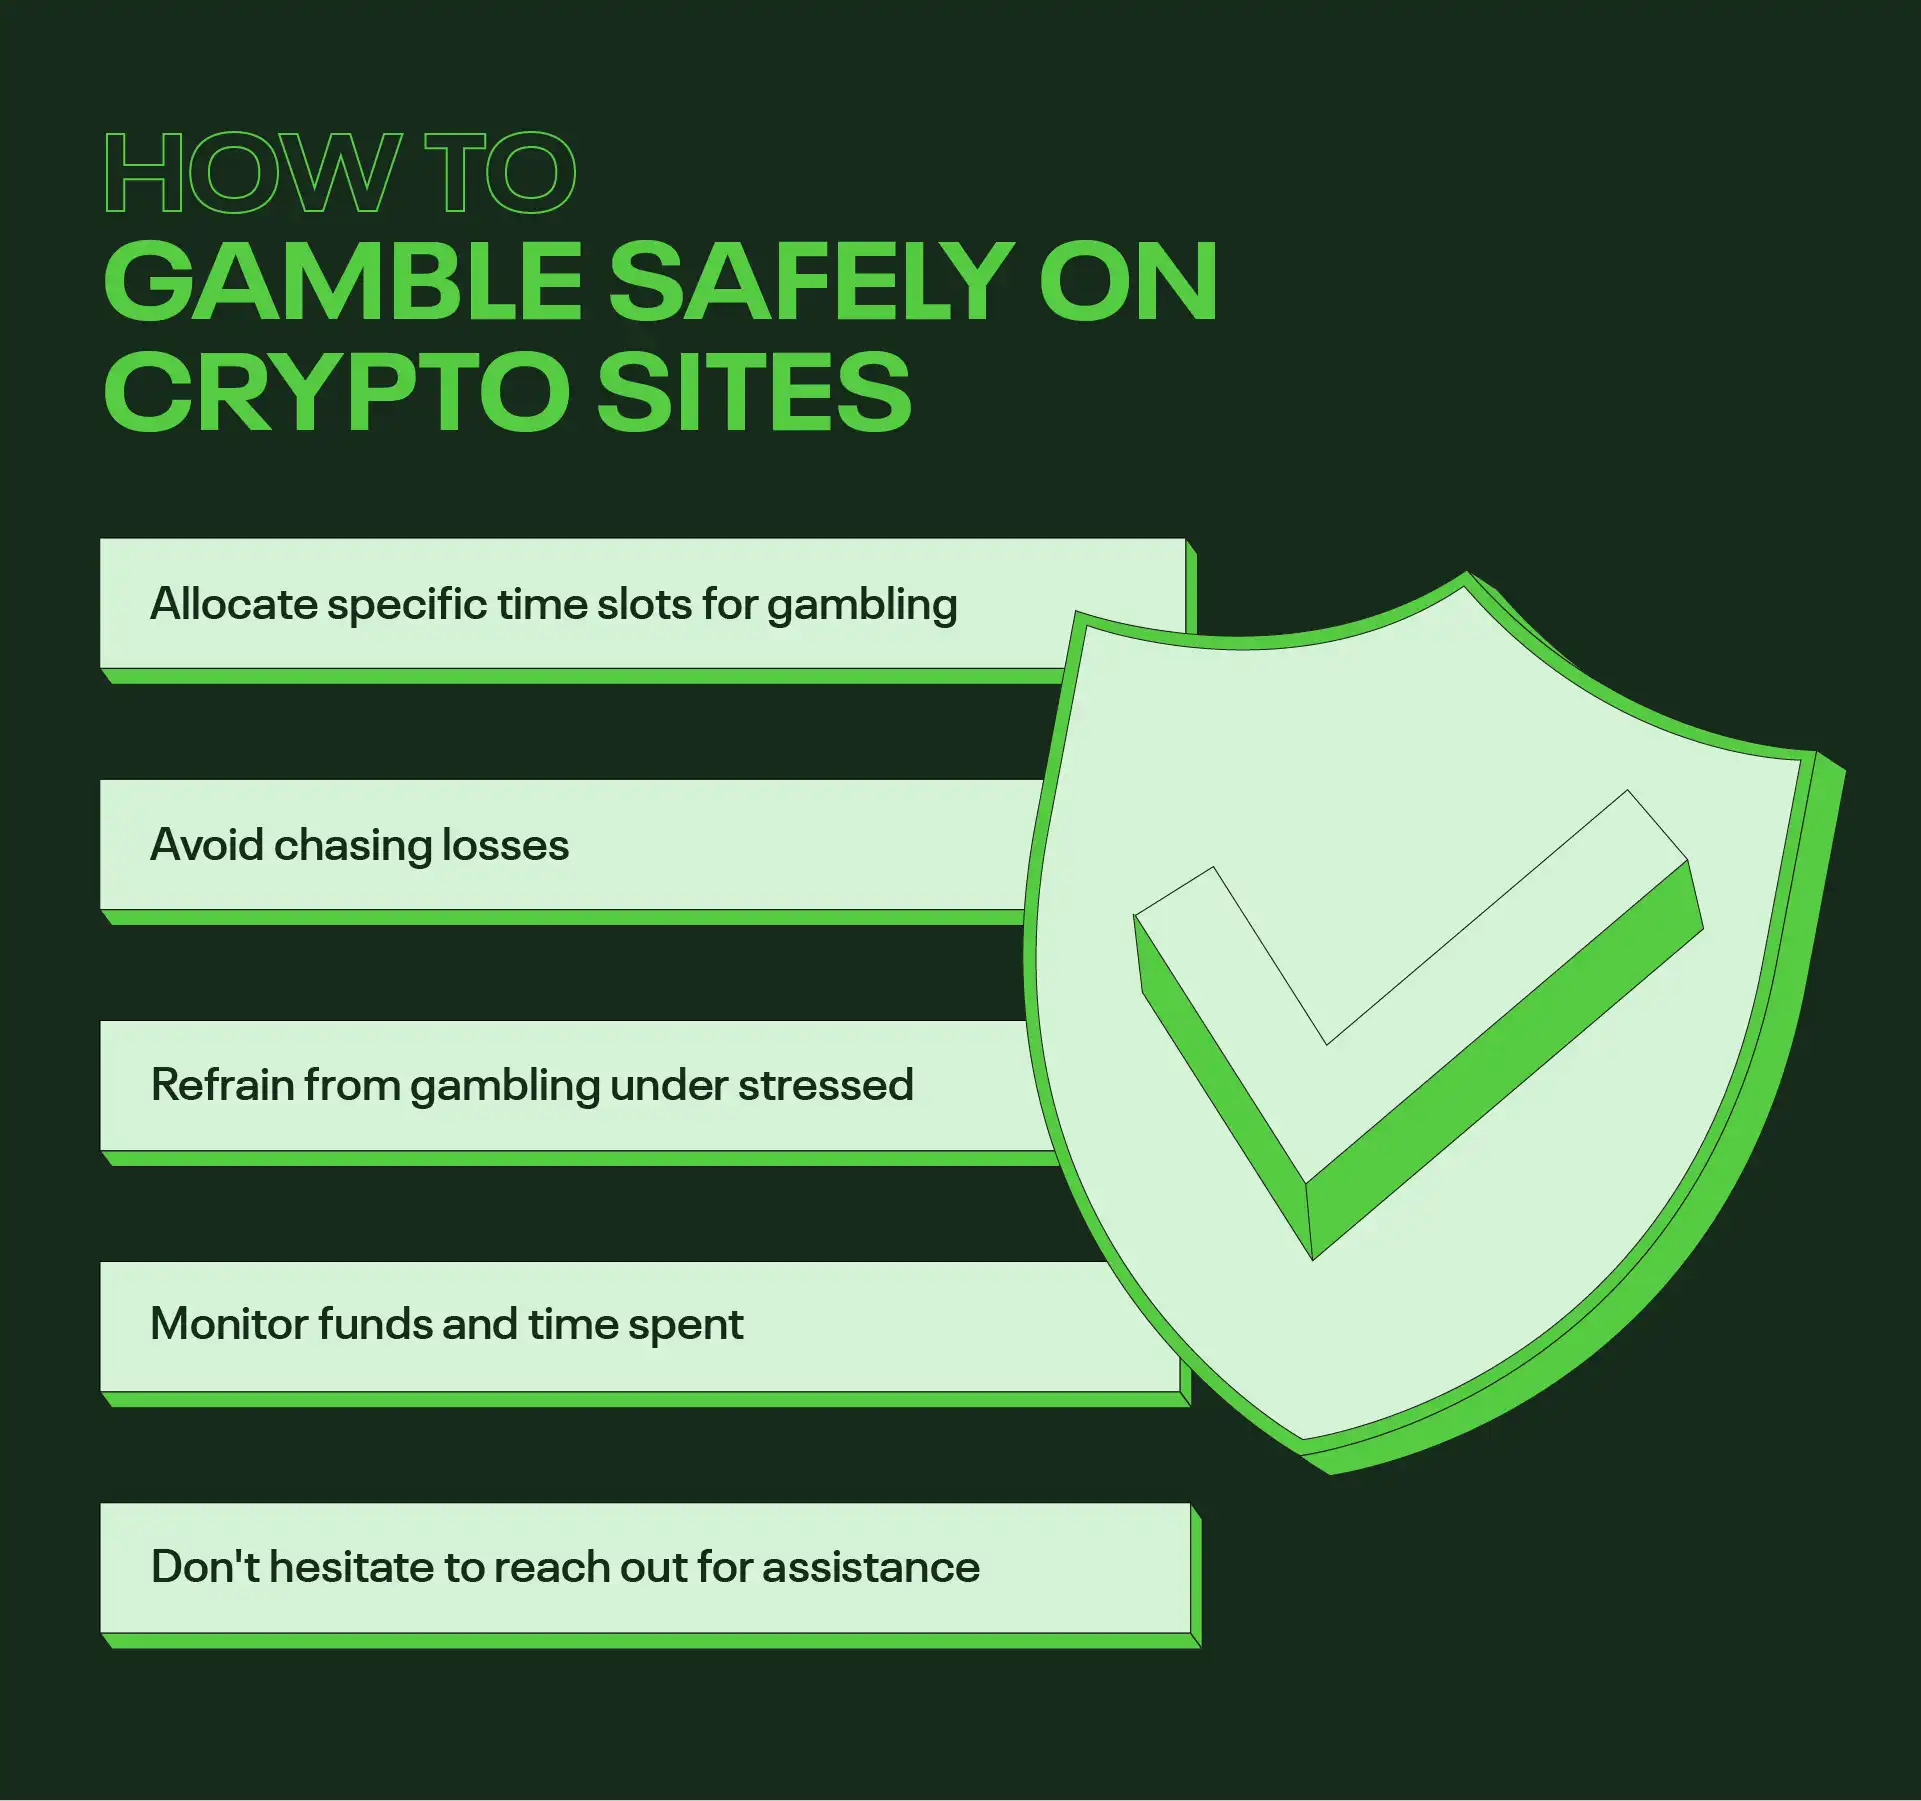 How to gamble safely on crypto sites